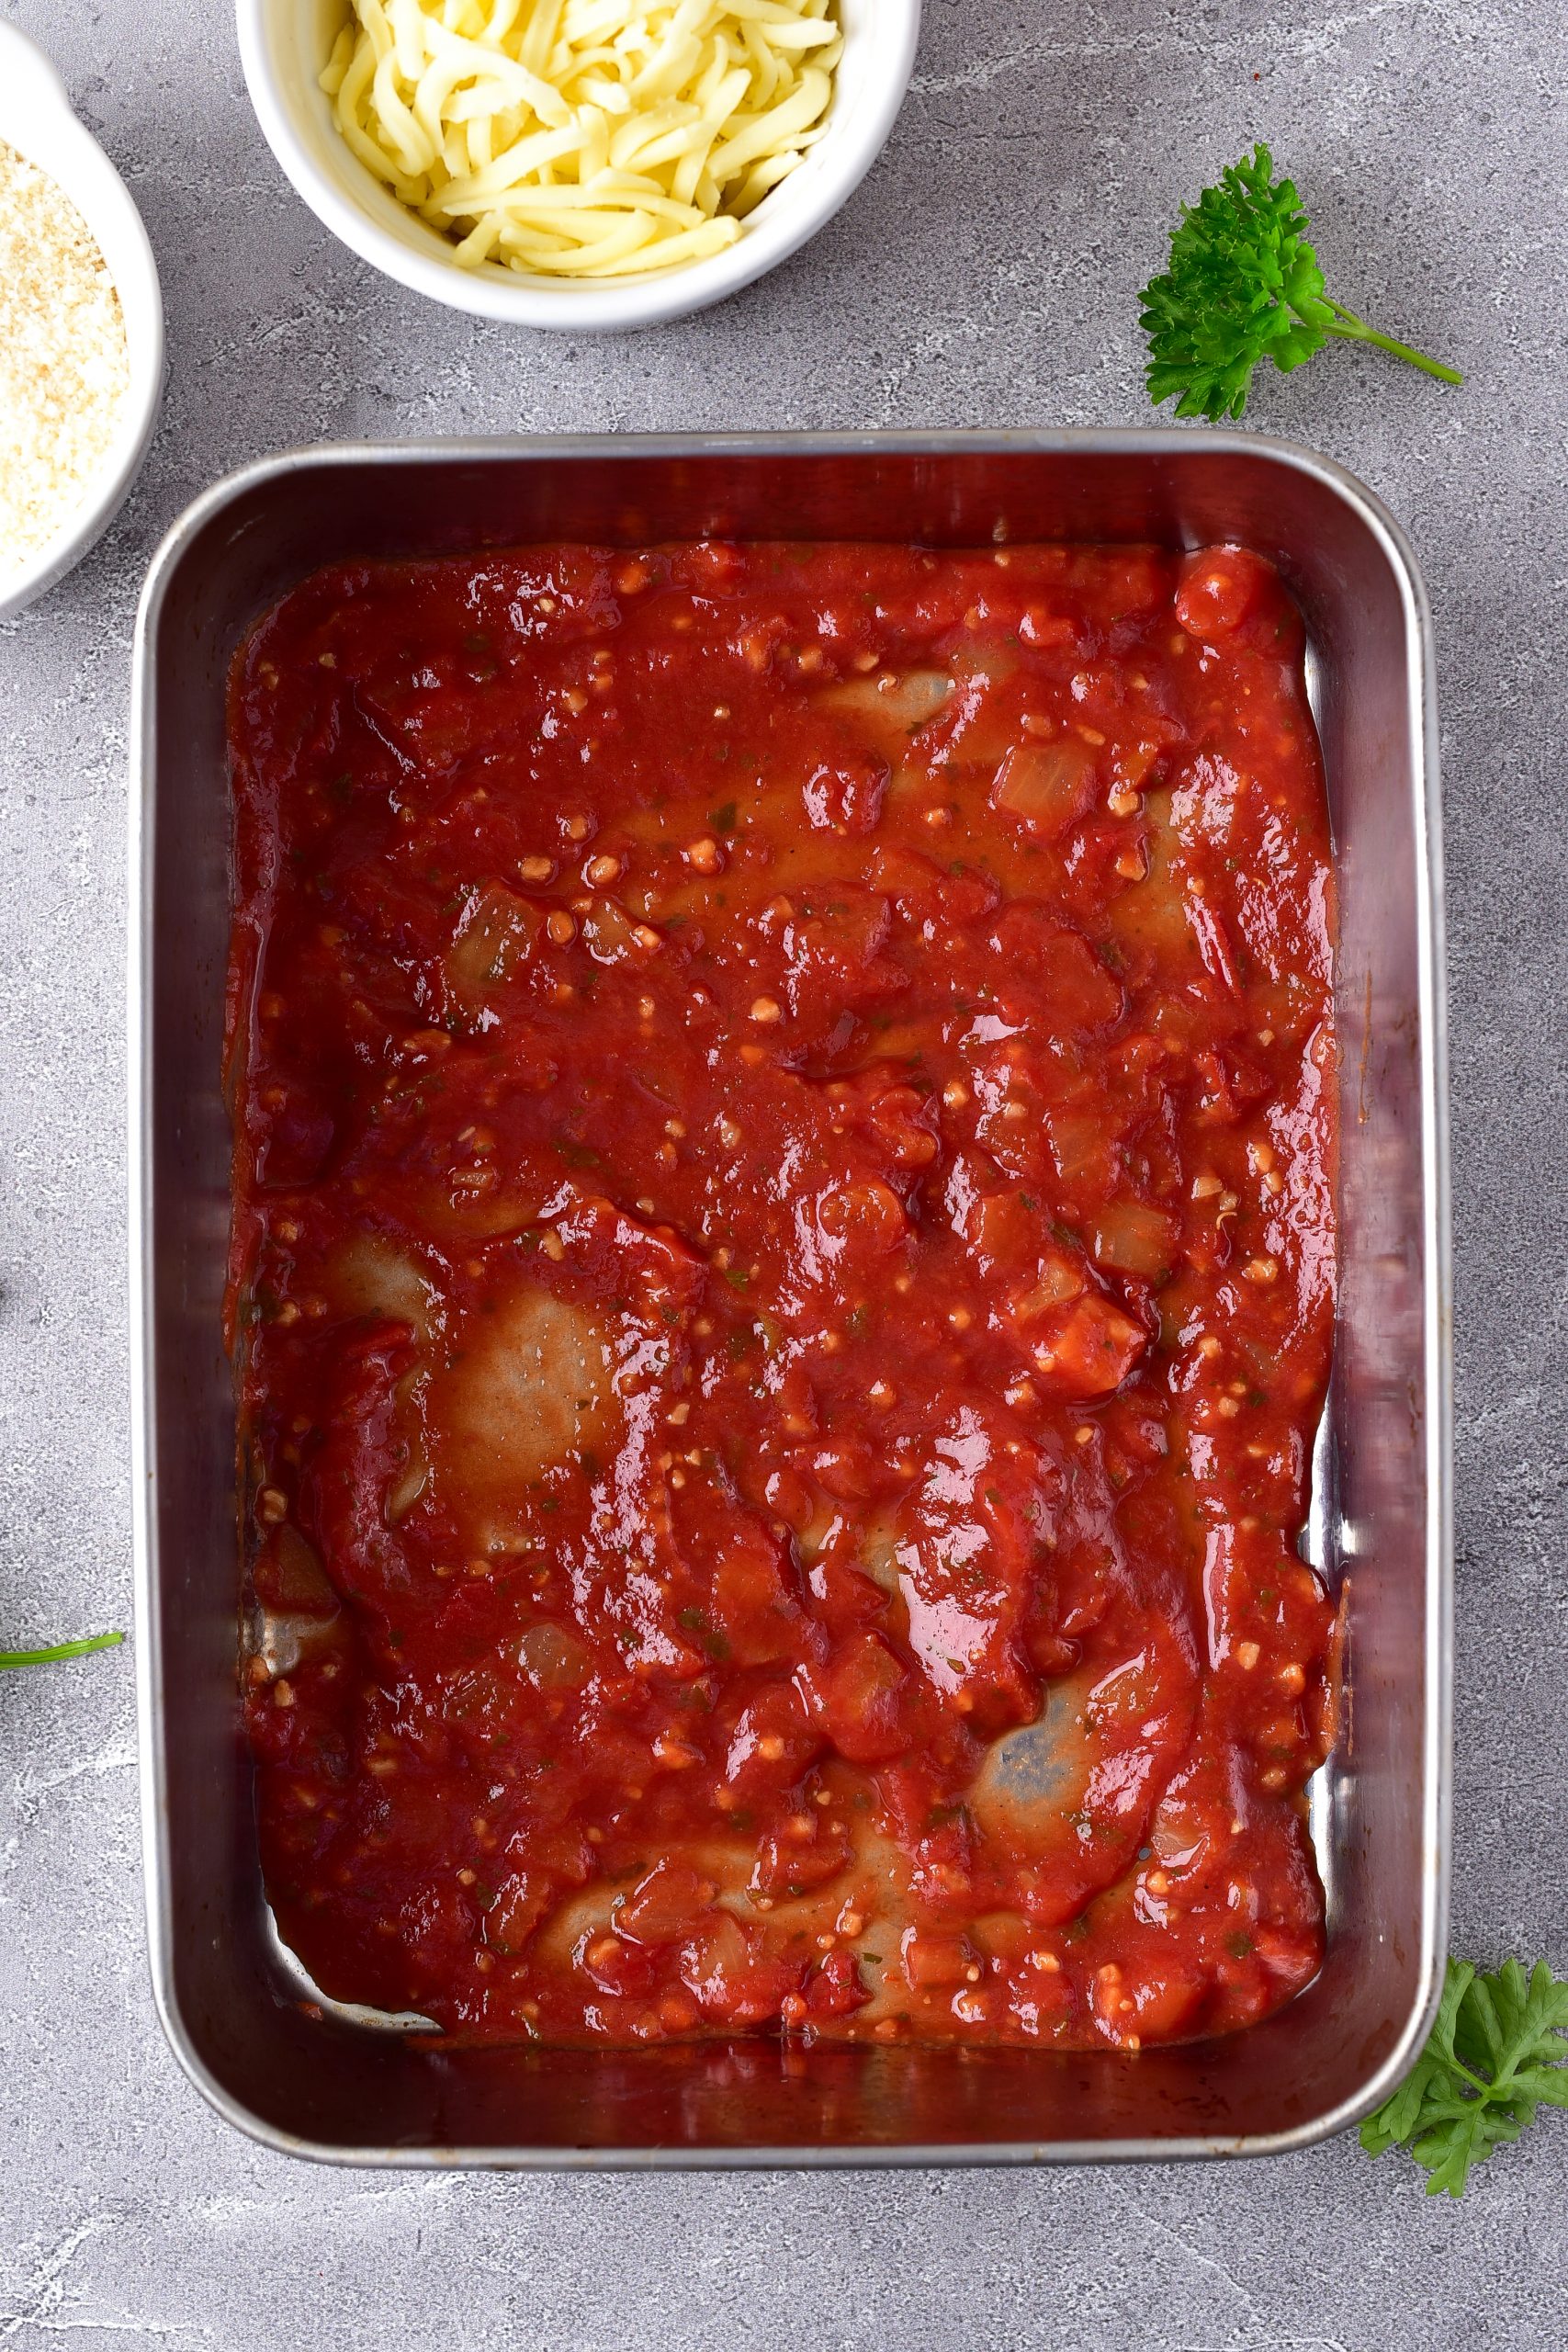 Spread half a jar of sauce into the bottom of the baking sheet. 